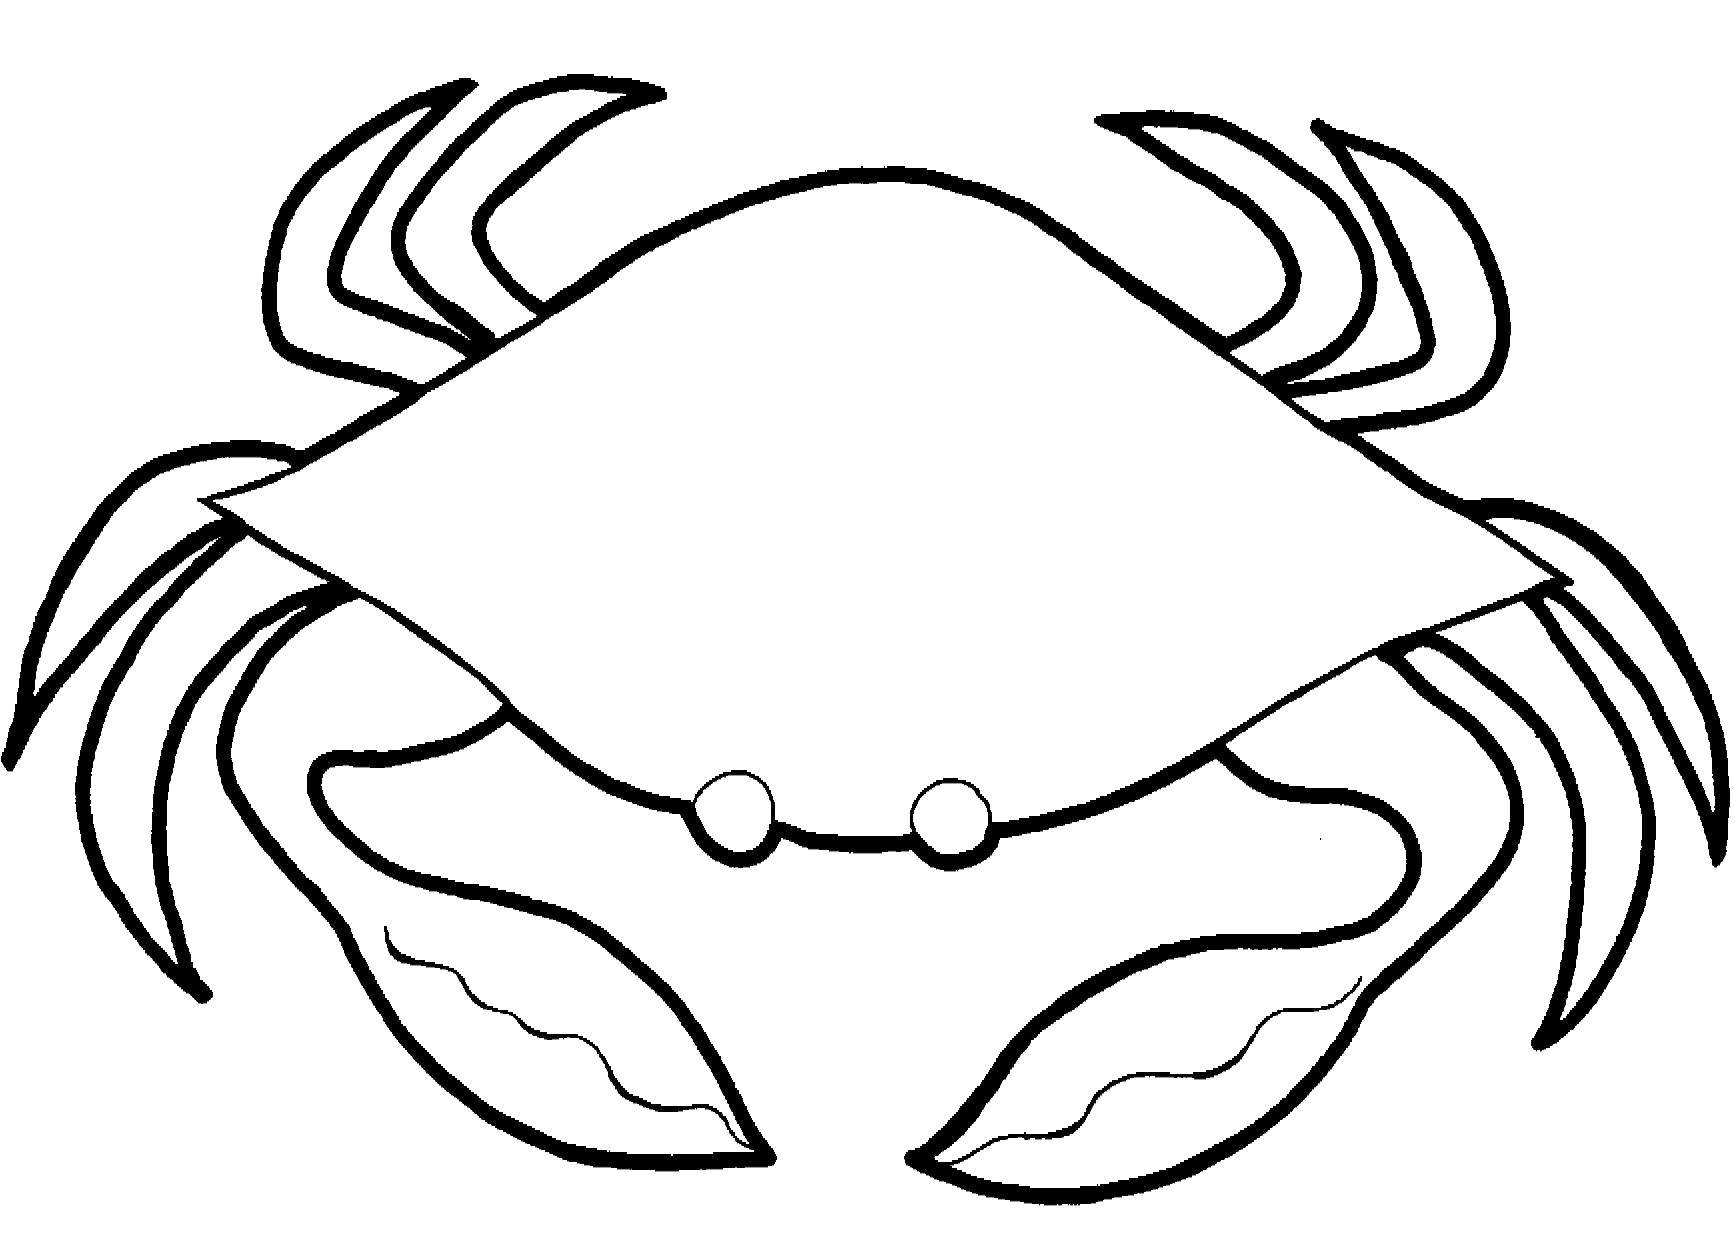 Coloring Crab. Category marine. Tags:  Underwater, crab.